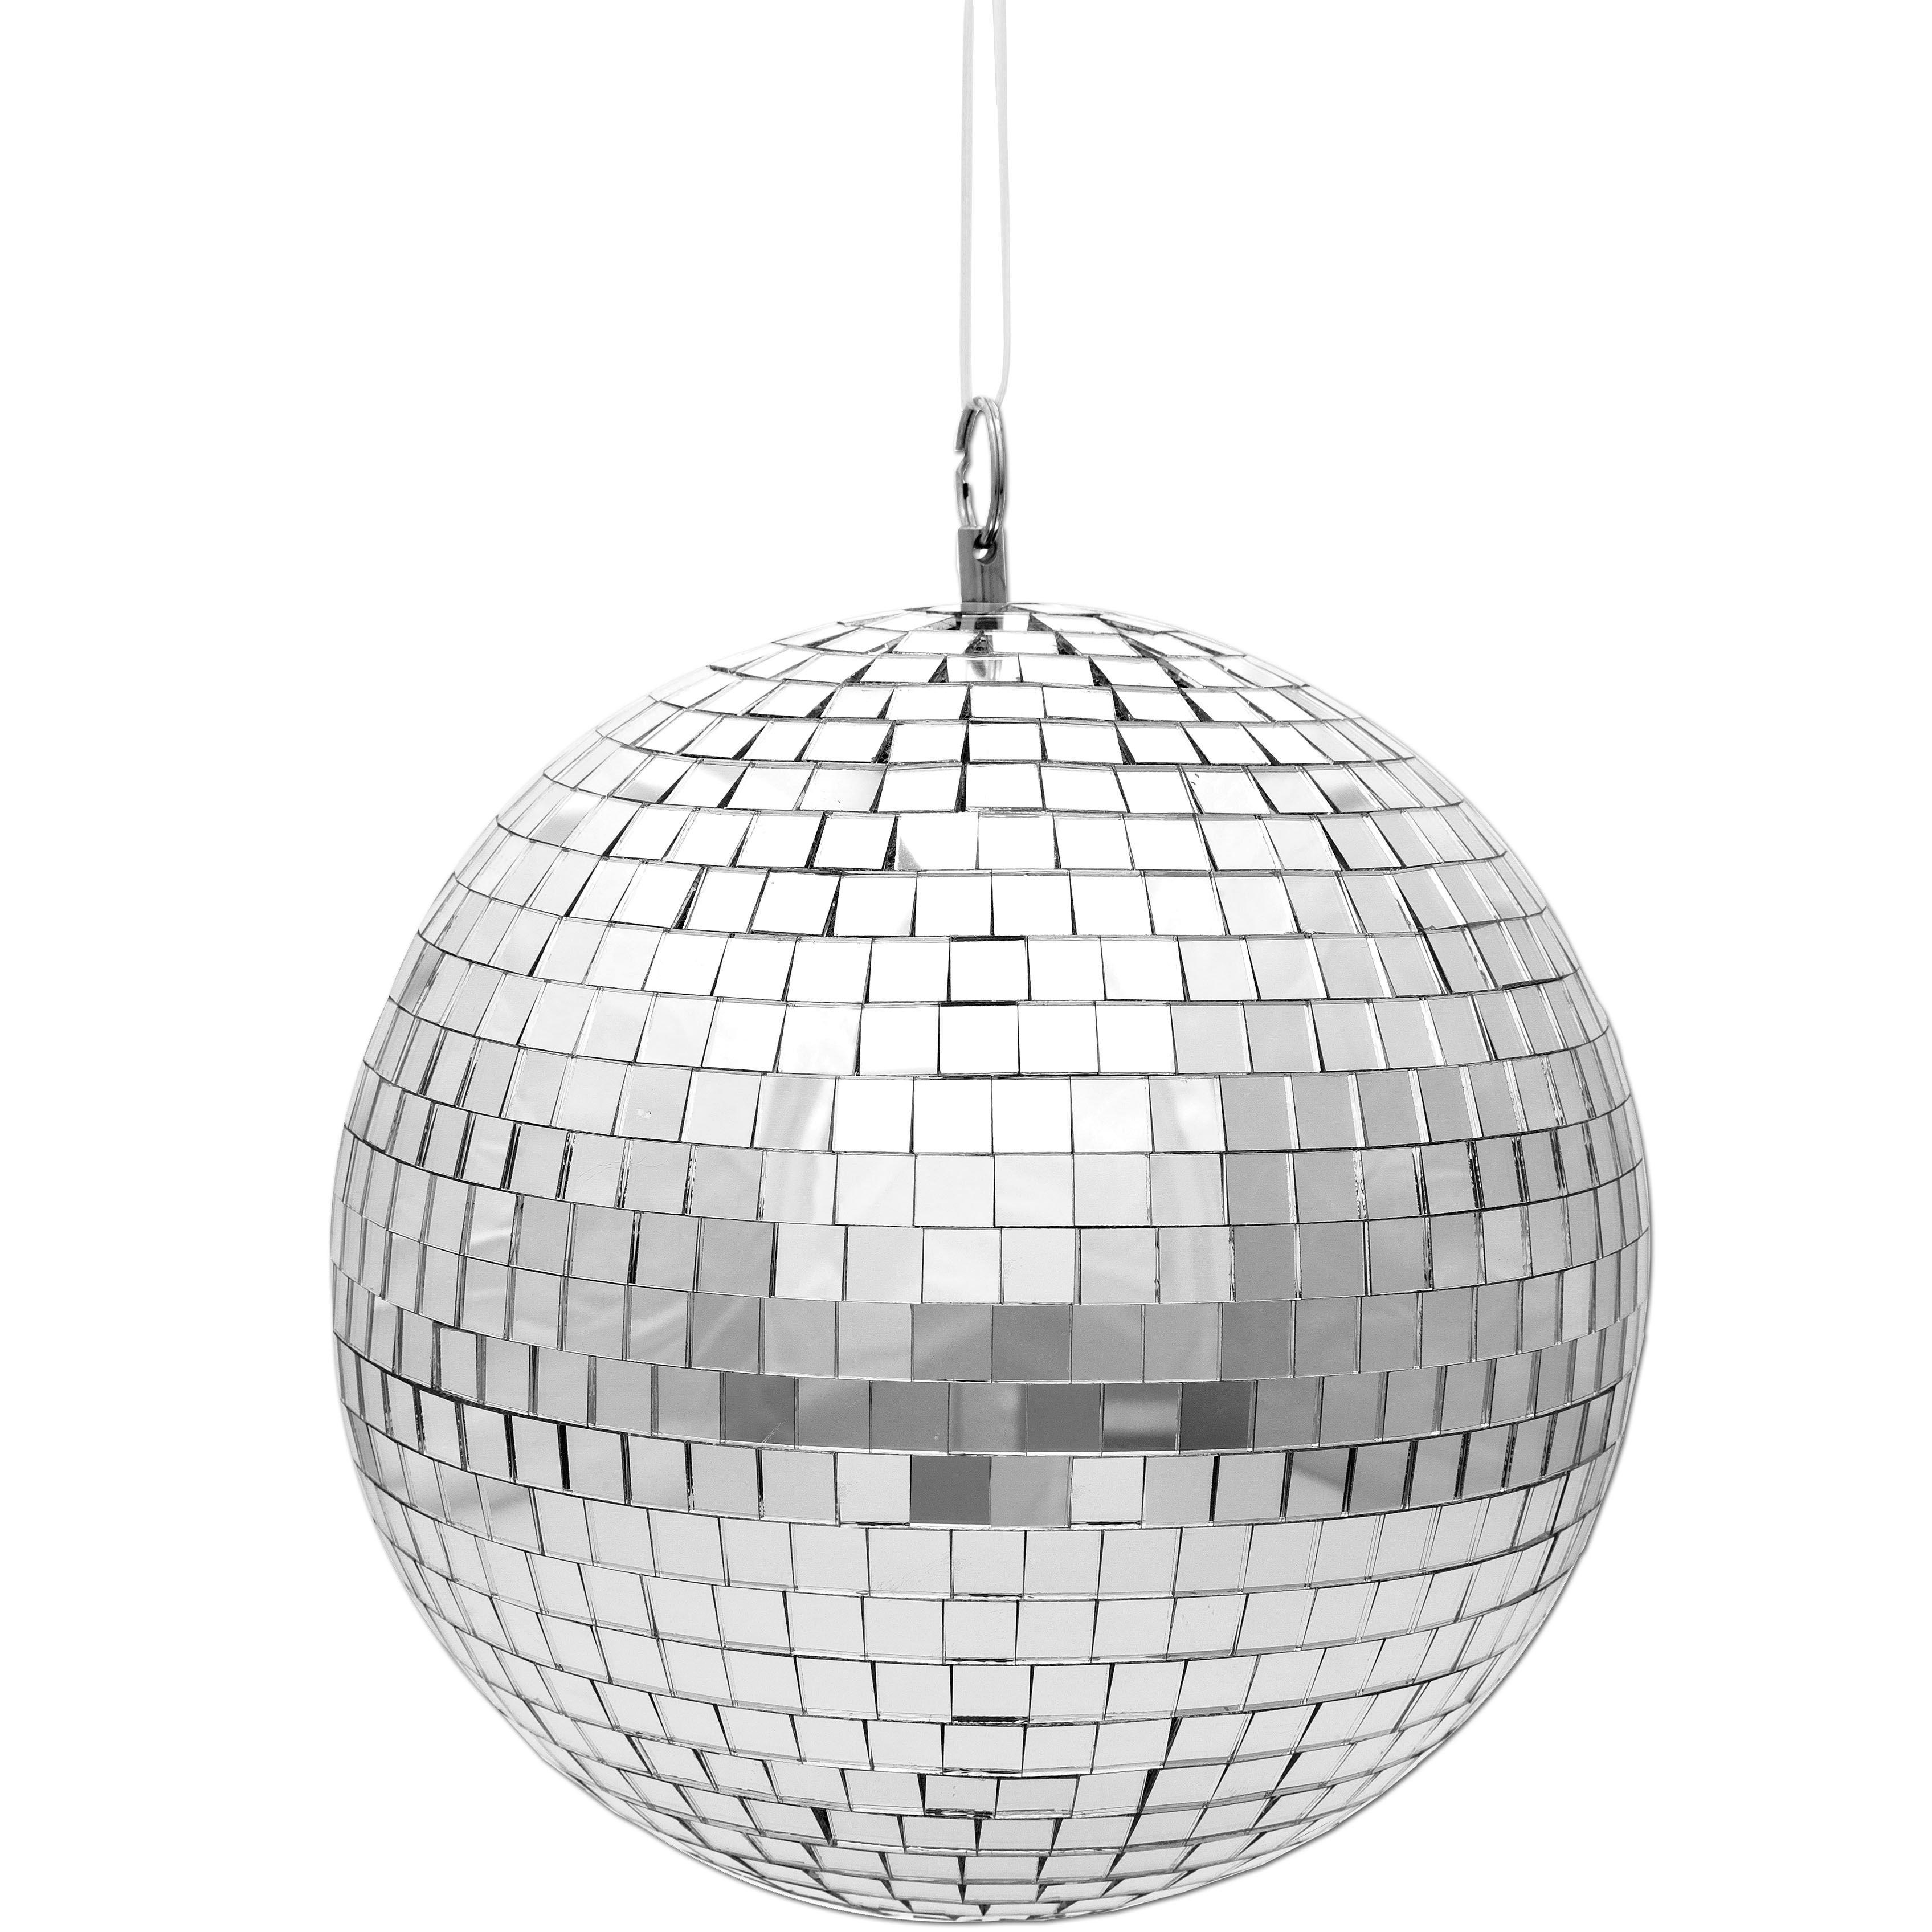 Visual Effects MB4 4-Inch Mirror Ball